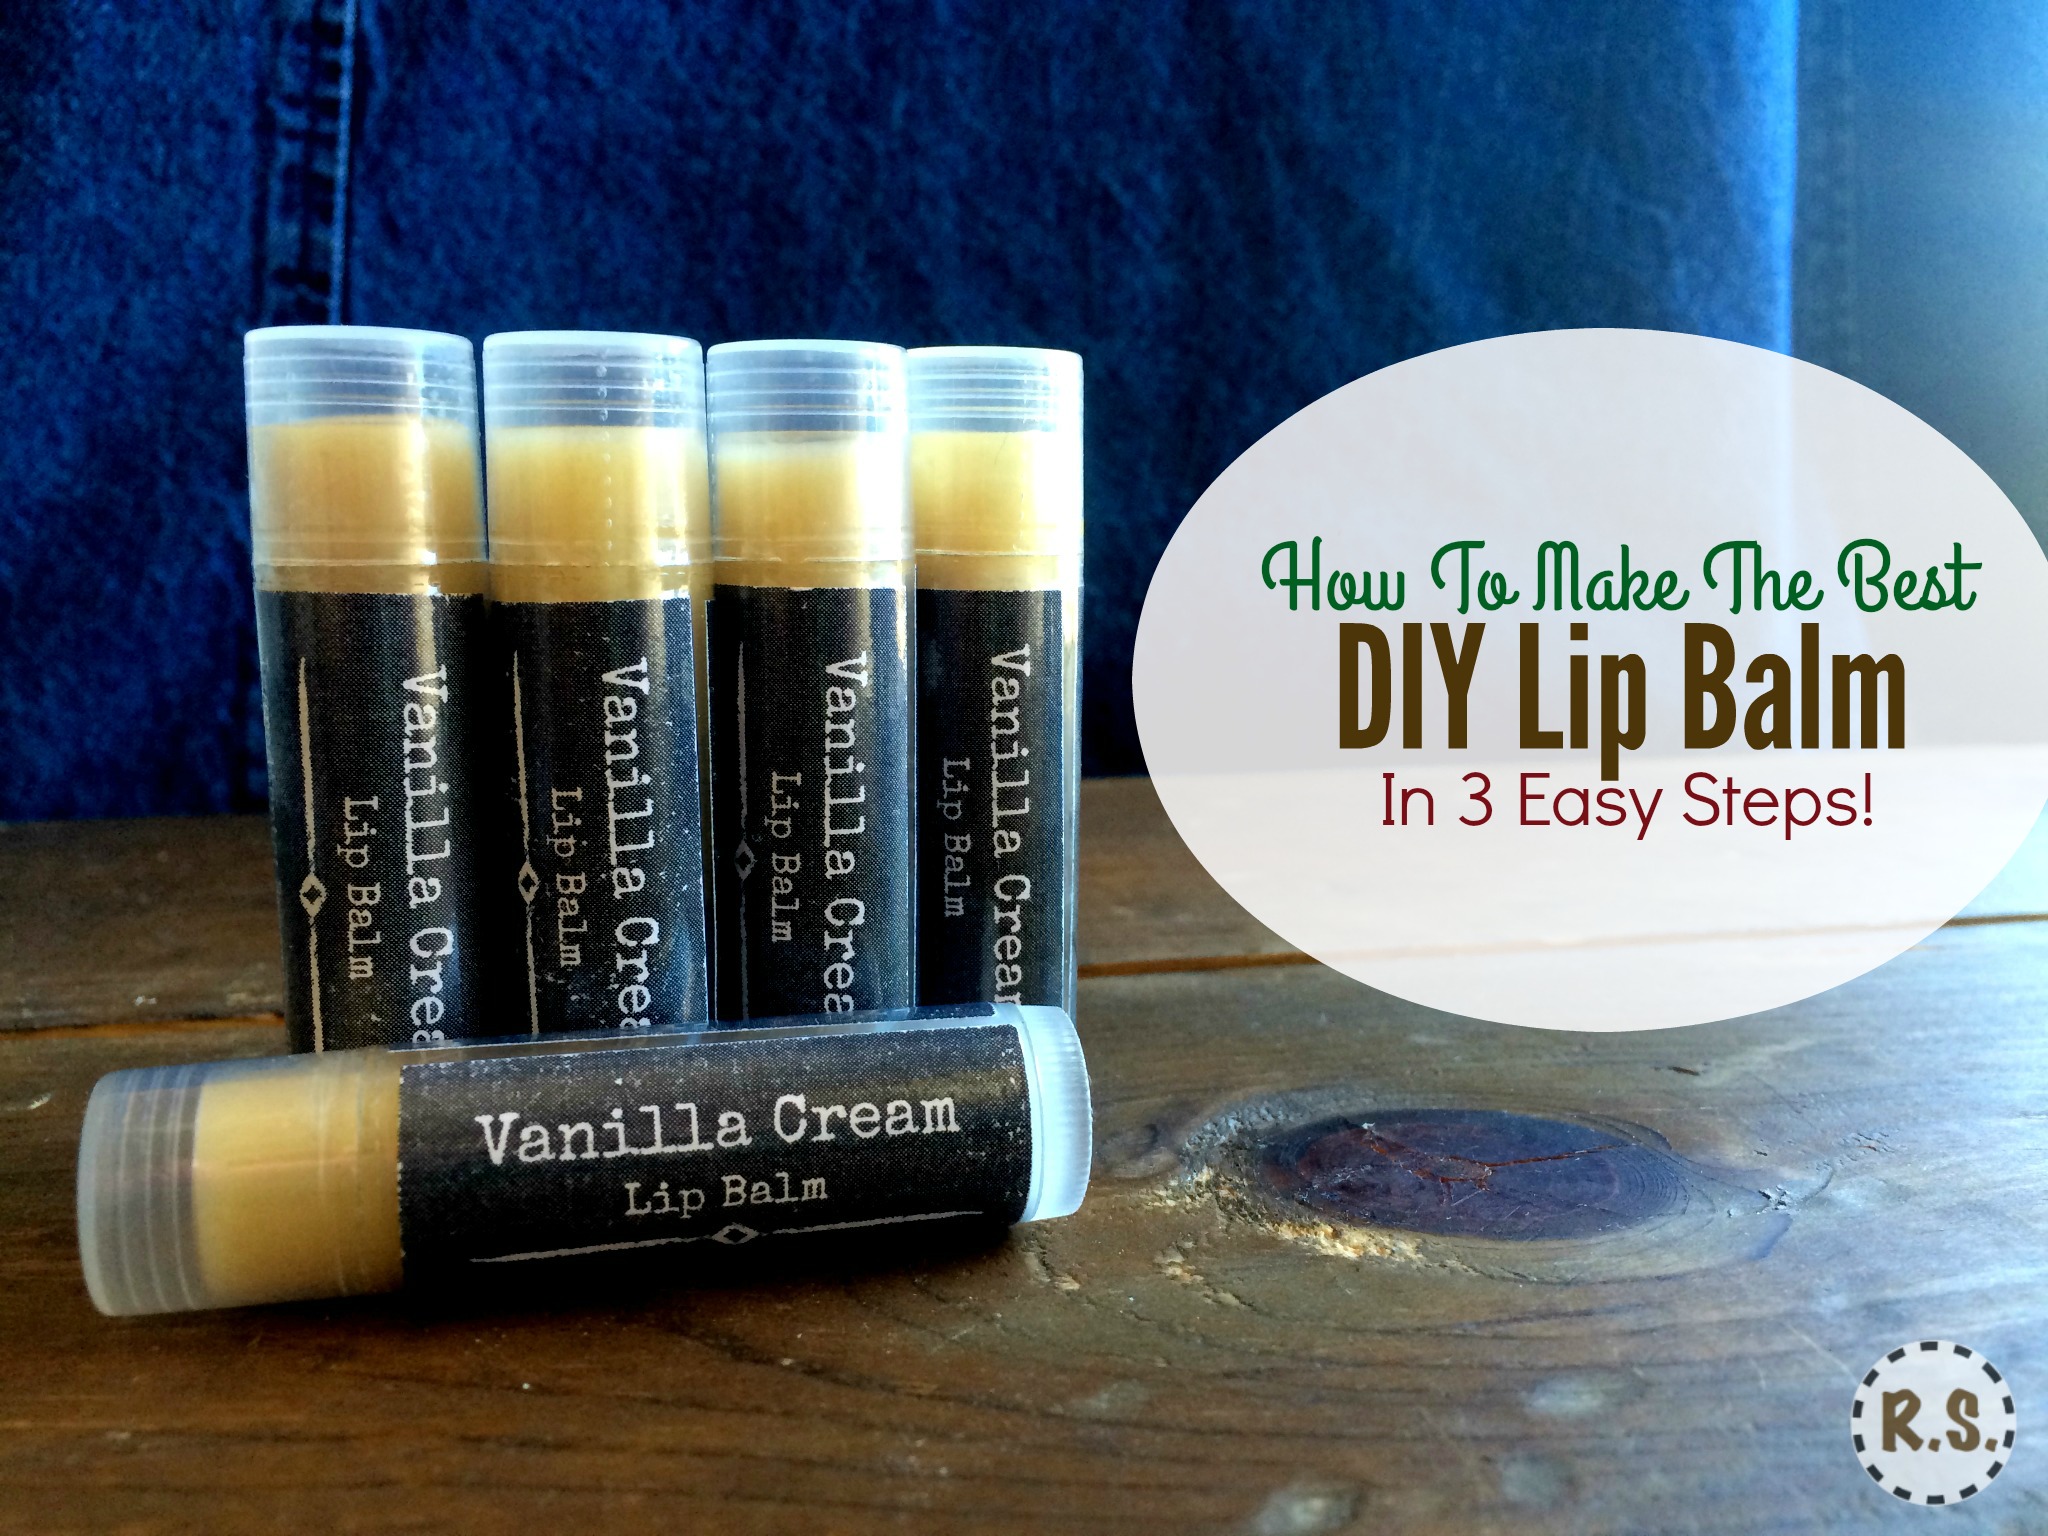 A super easy lip balm recipe you will love. This DIY lip balm is healing, homemade & the best. You will love the simplicity of the recipe and the soothing feel on your lips.